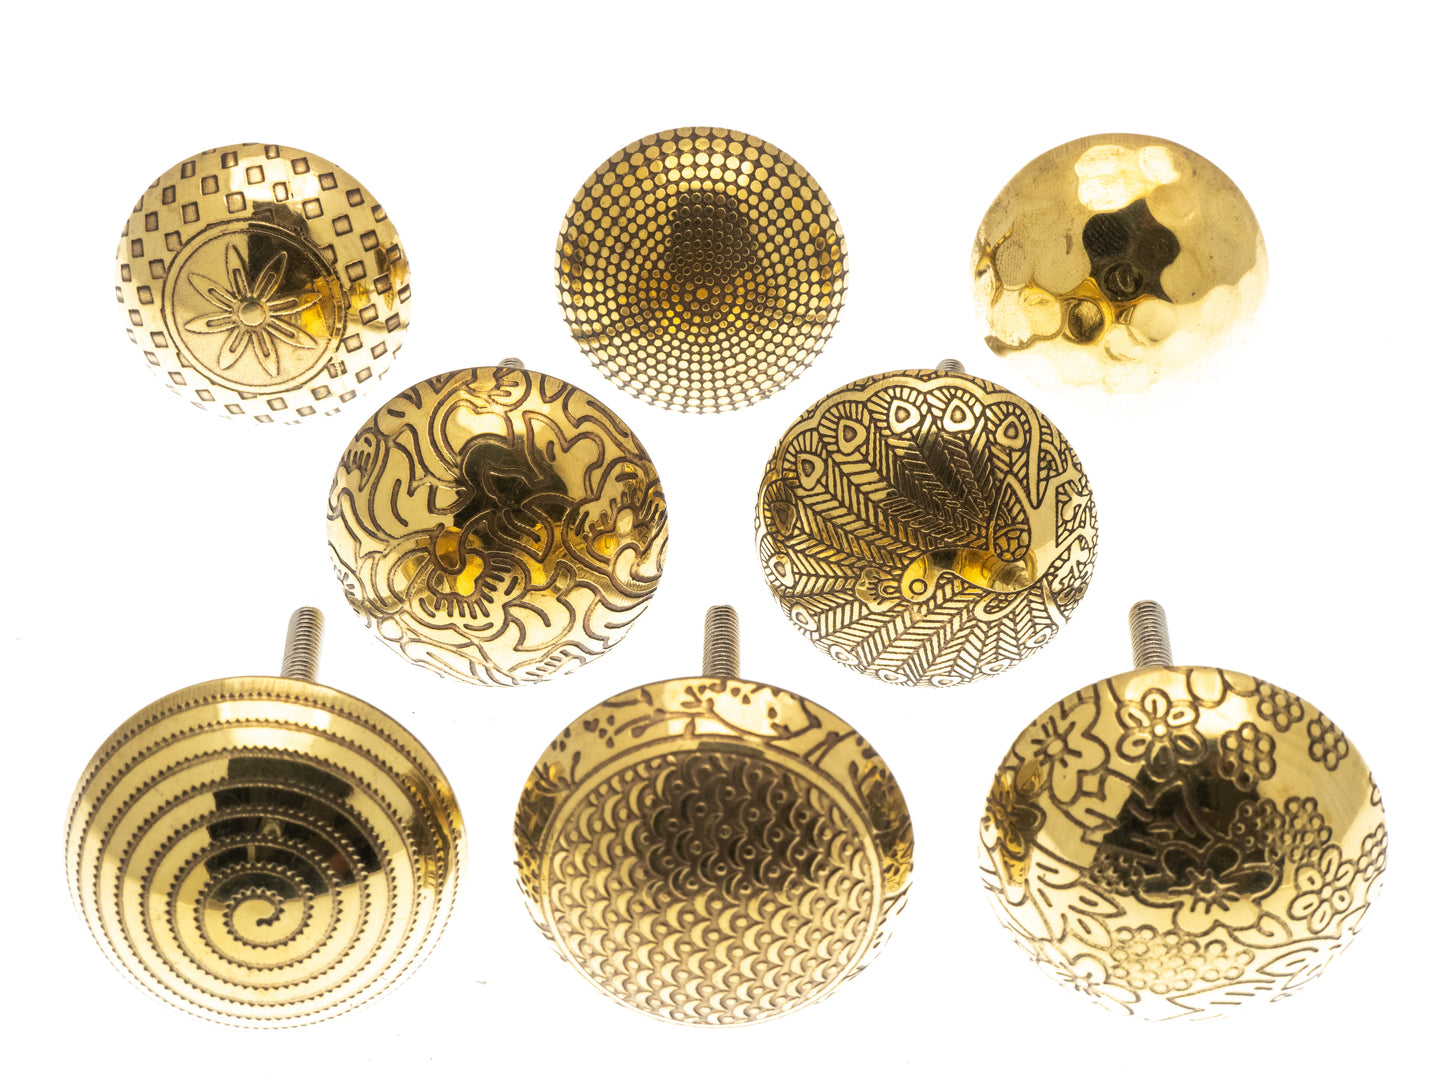 Moroccan themed brass plated cupboard knobs in a variety of embossed patterns - Set of 8